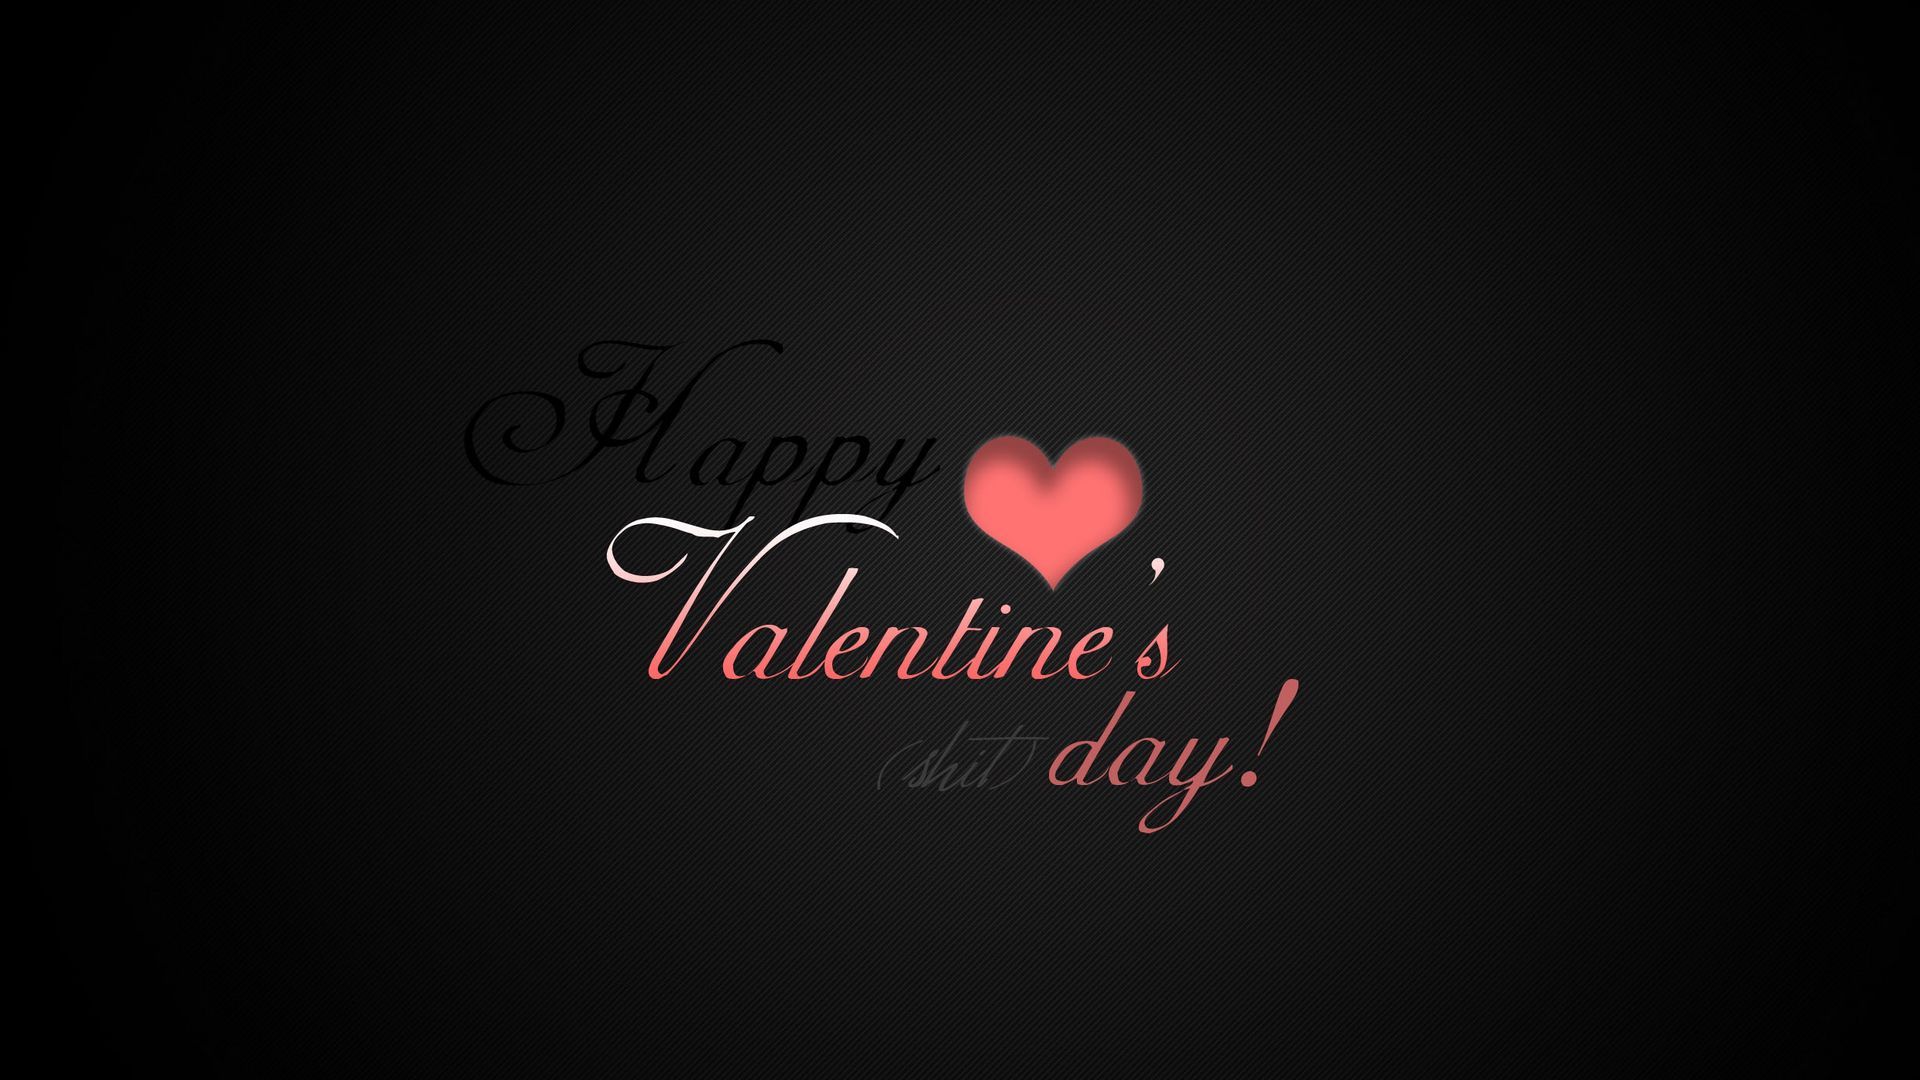 Download wallpaper 1920x1080 valentines day, heart, inscription, black, red full hd, hdtv, fhd, 1080p HD background